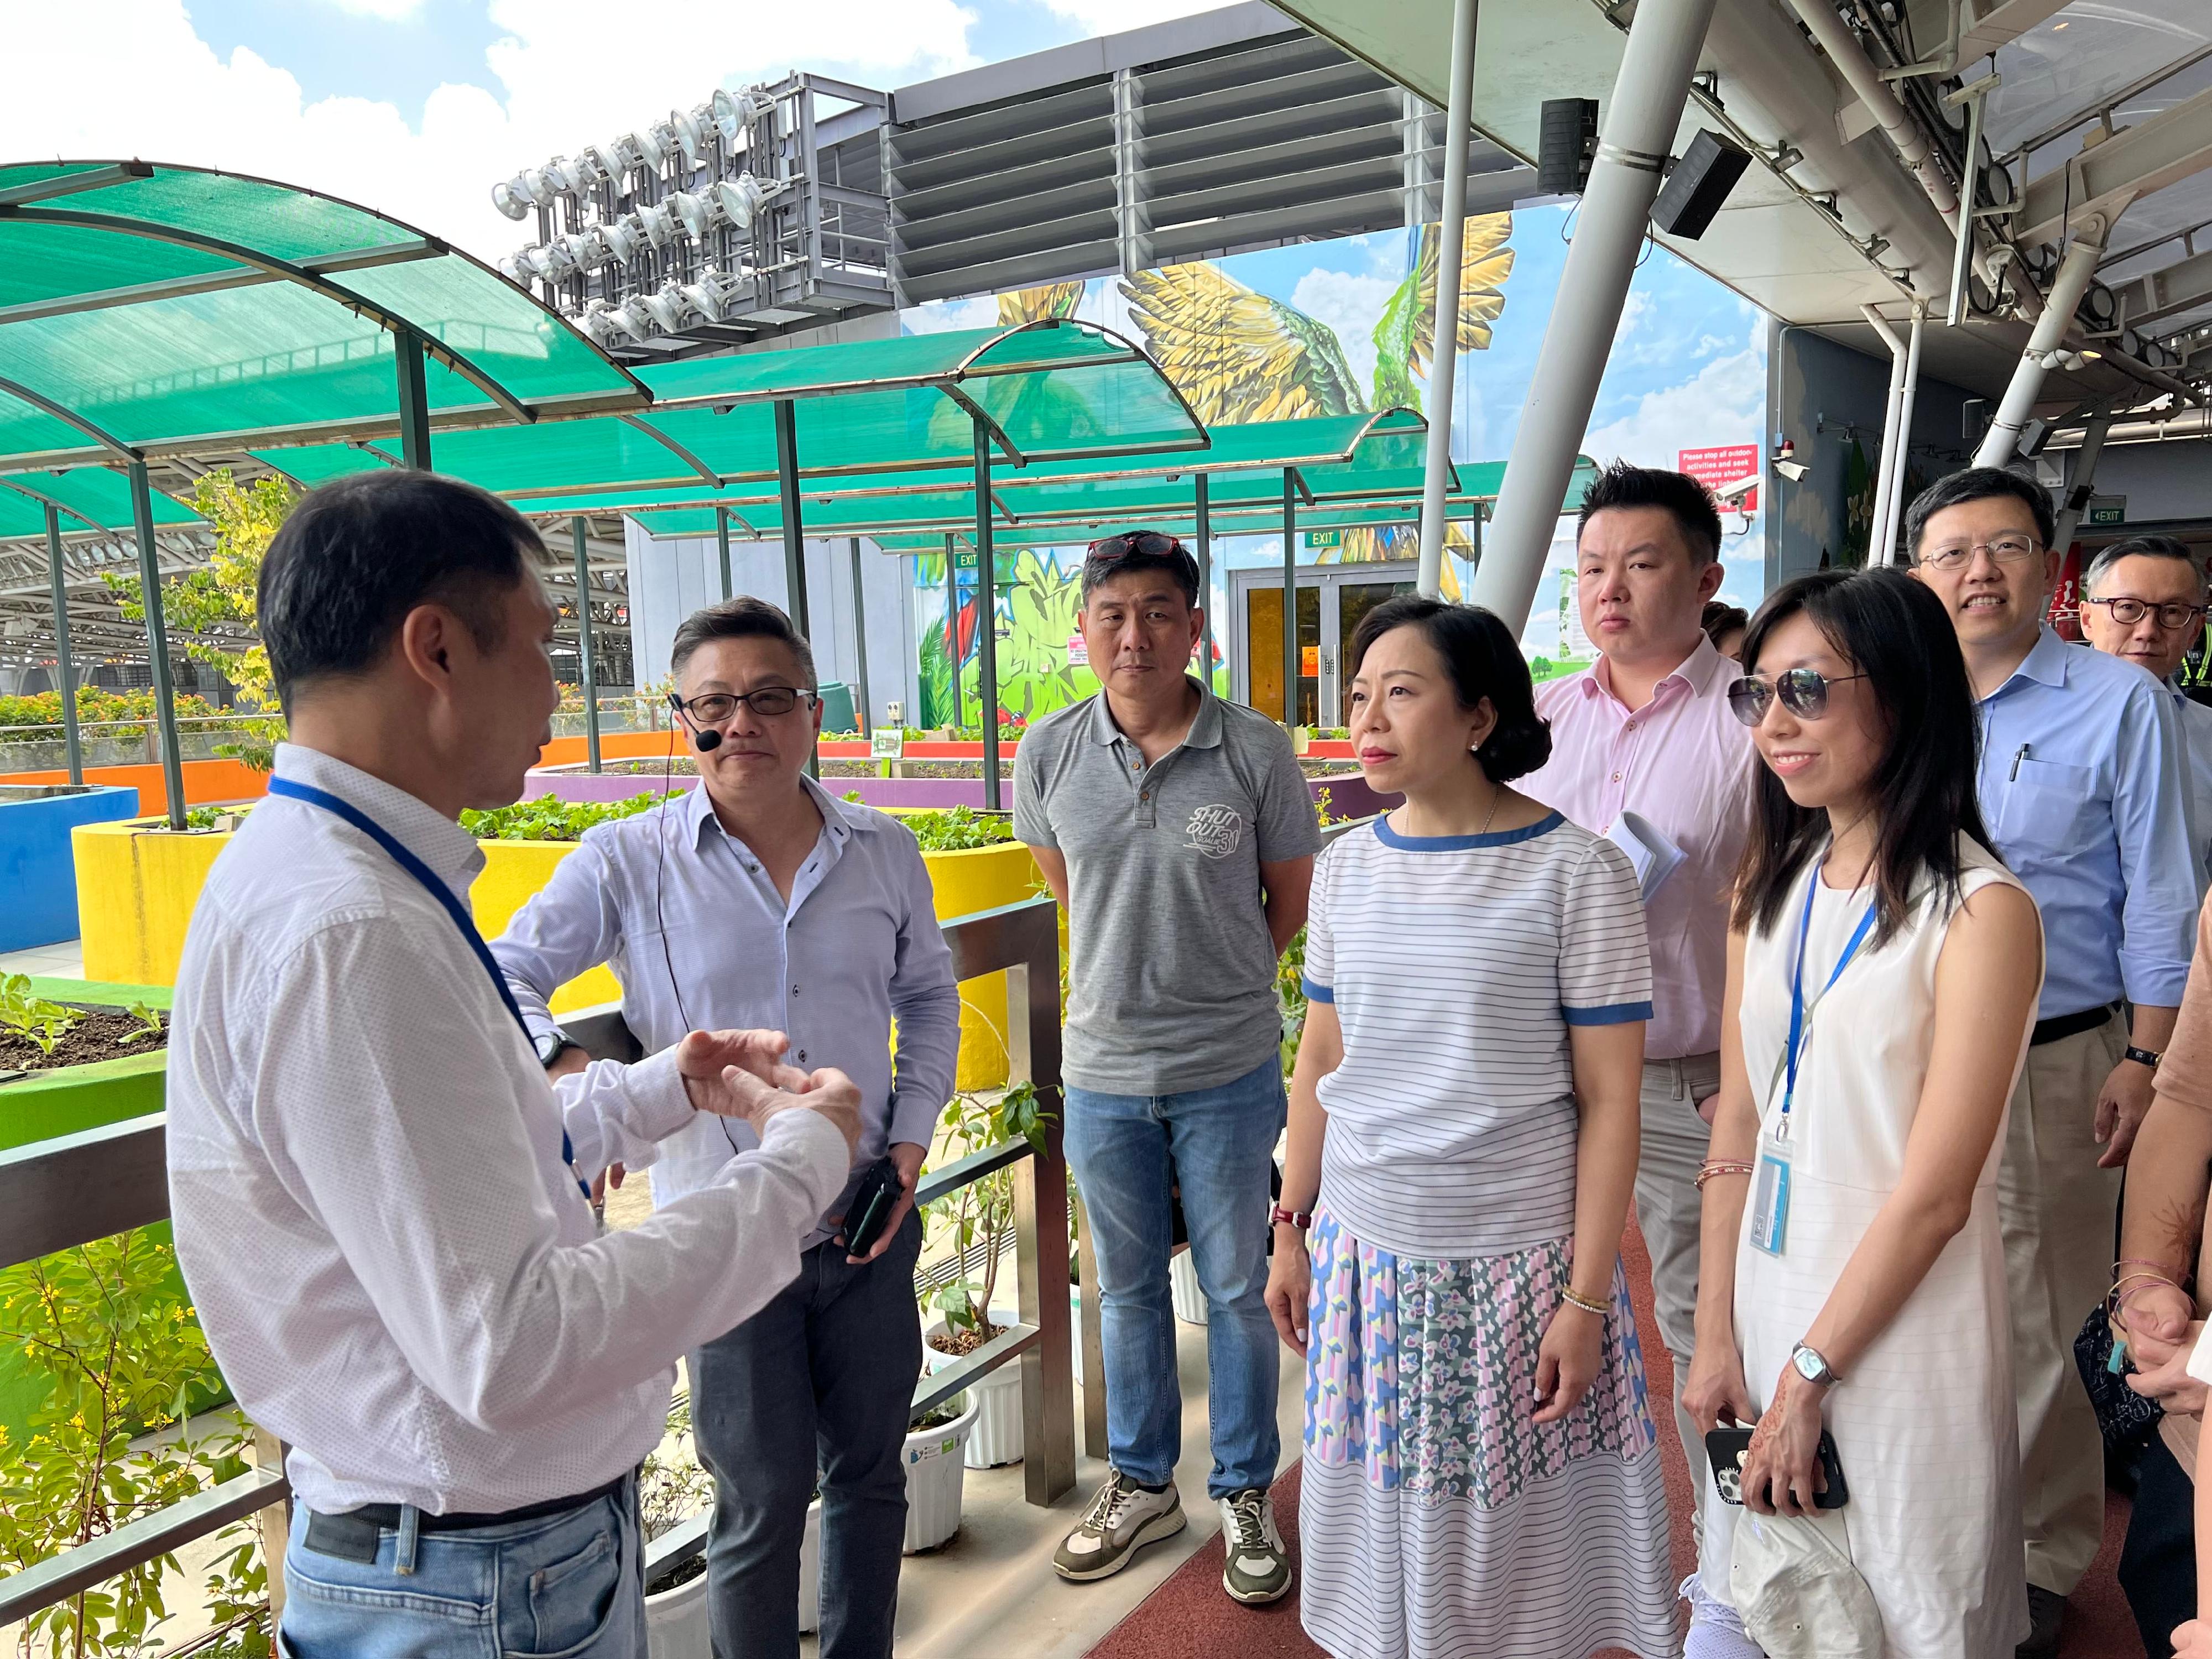 The Secretary for Home and Youth Affairs, Miss Alice Mak, today (February 18) visited Our Tampines Hub, a community and leisure complex in Singapore. Photos shows Miss Mak (fourth left) and the Vice-Chairman of the Youth Development Commission, Mr Kenneth Leung (fifth left), touring the facilities of the complex.